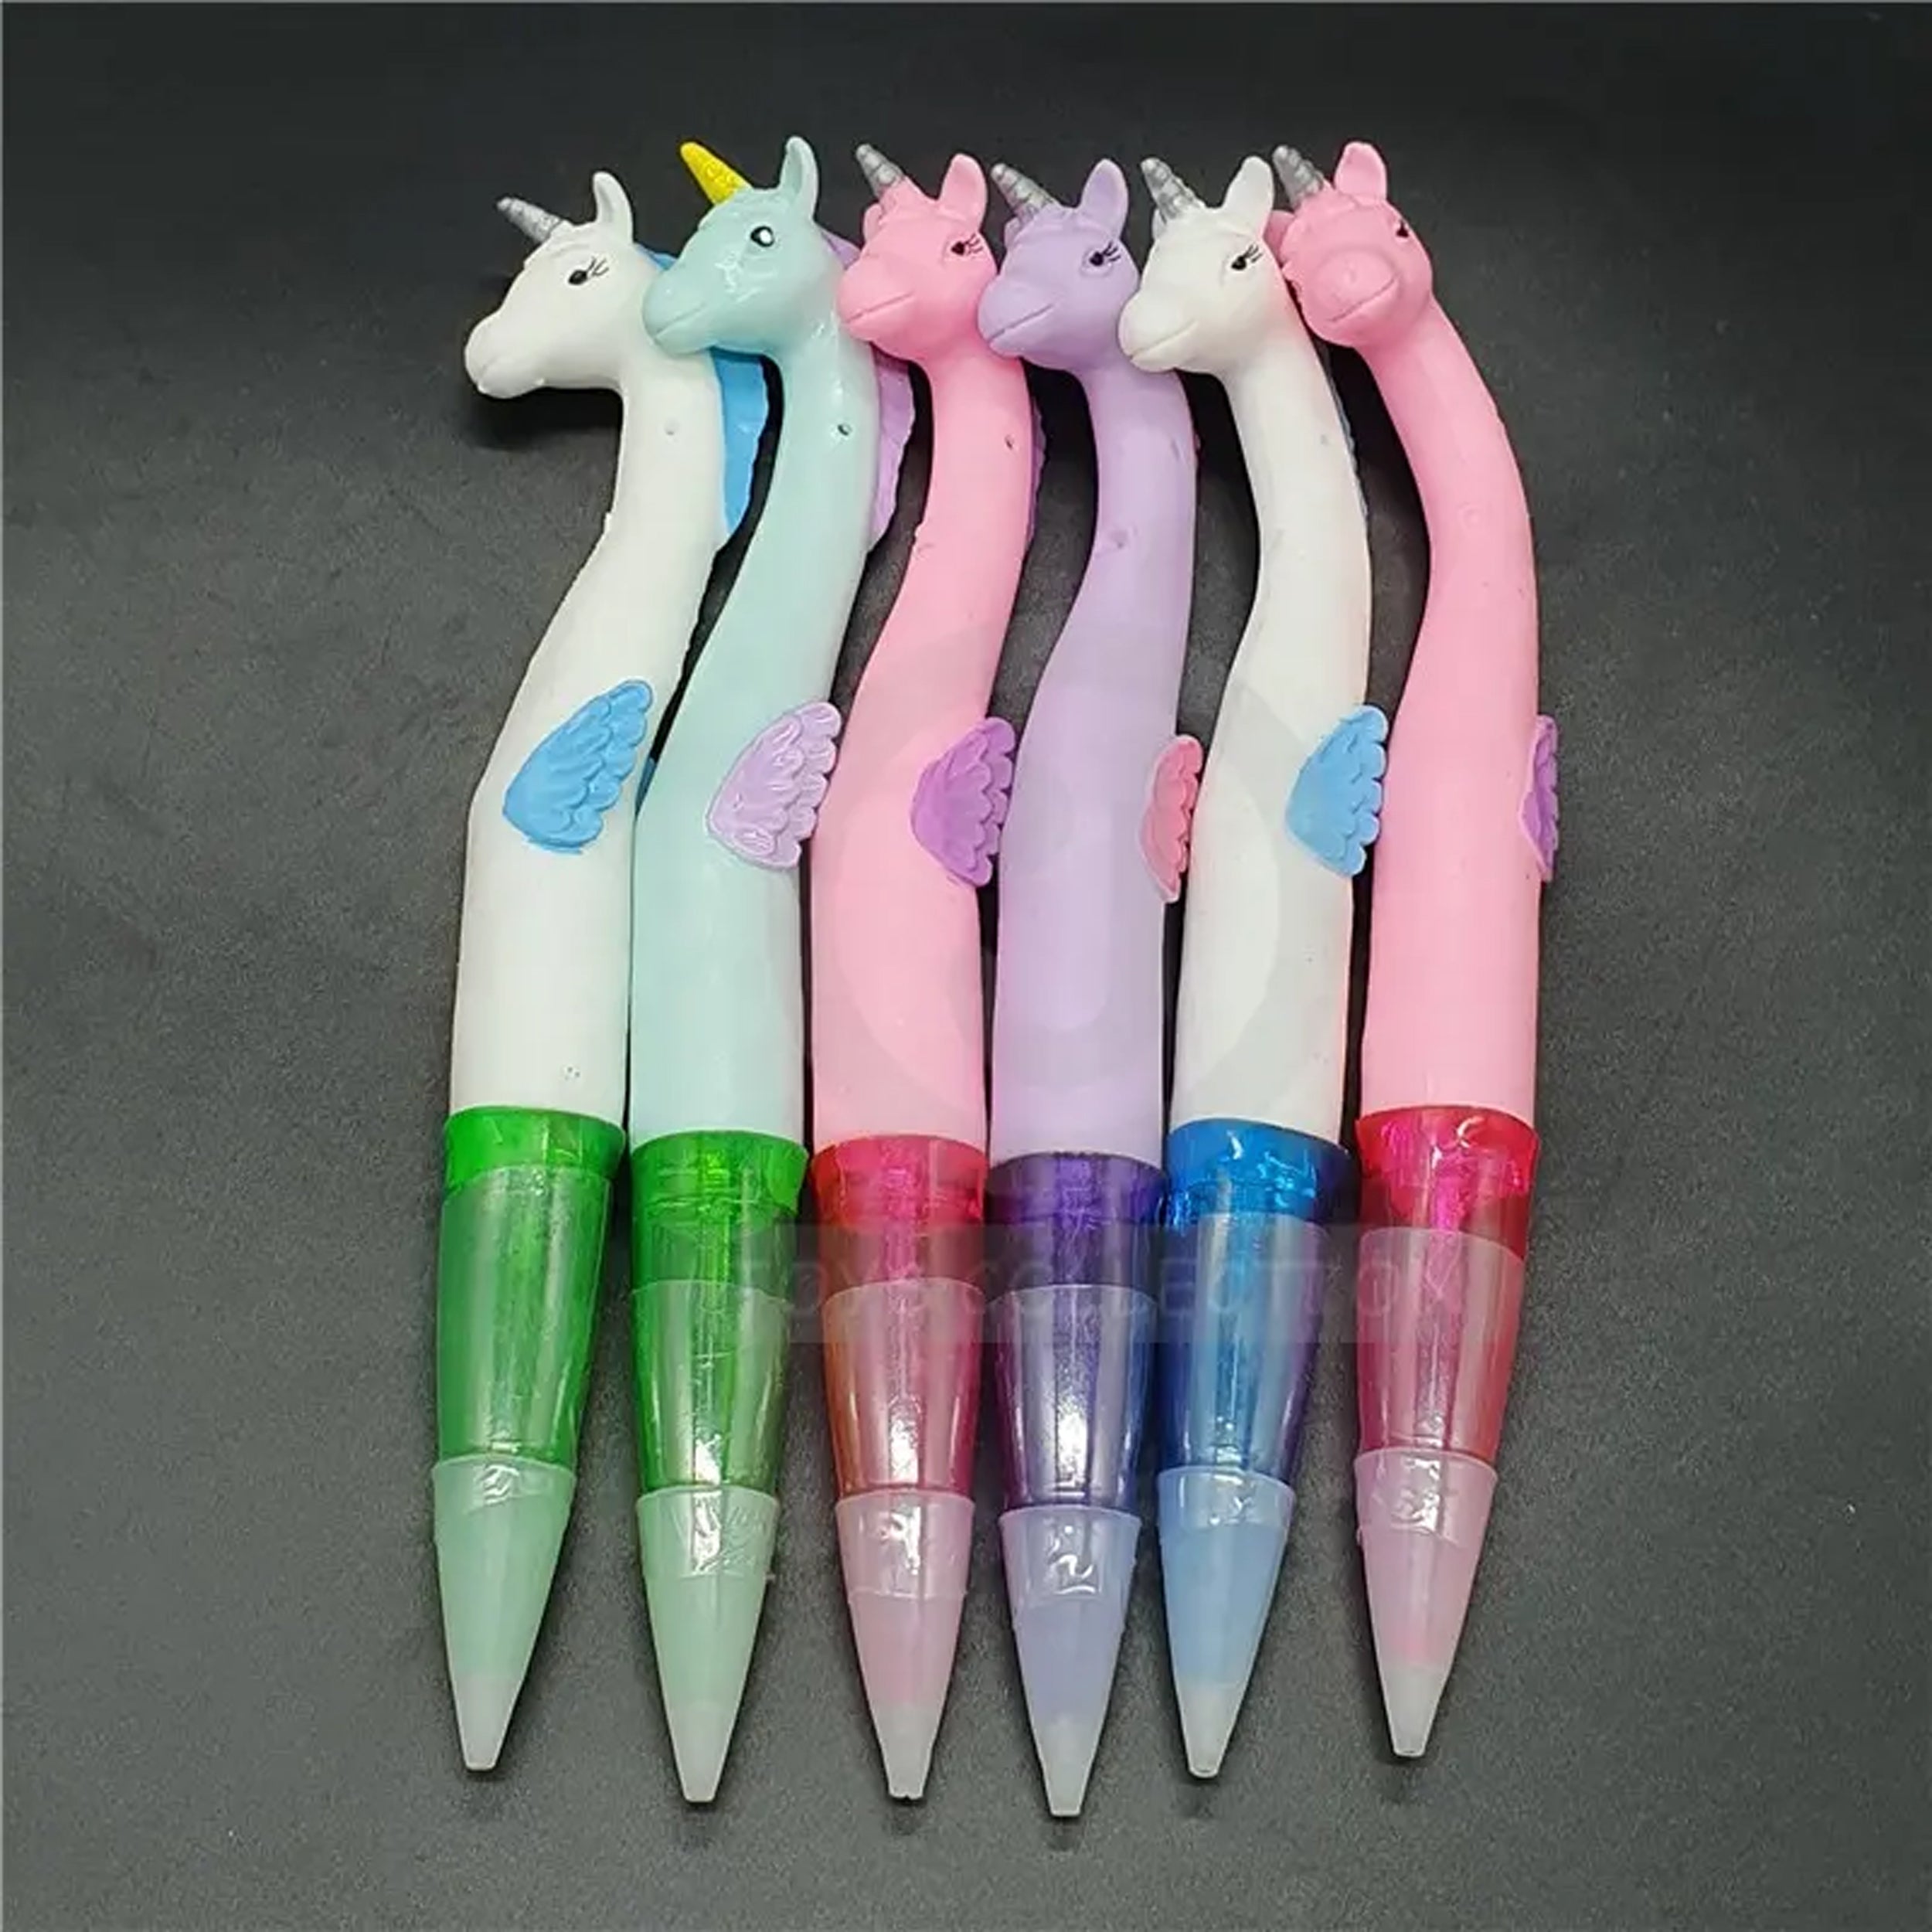 Unicorn School Office Supply Gift Creative Cute Pen Toys - Fun and Practical Way to Add Magic to Your Desk